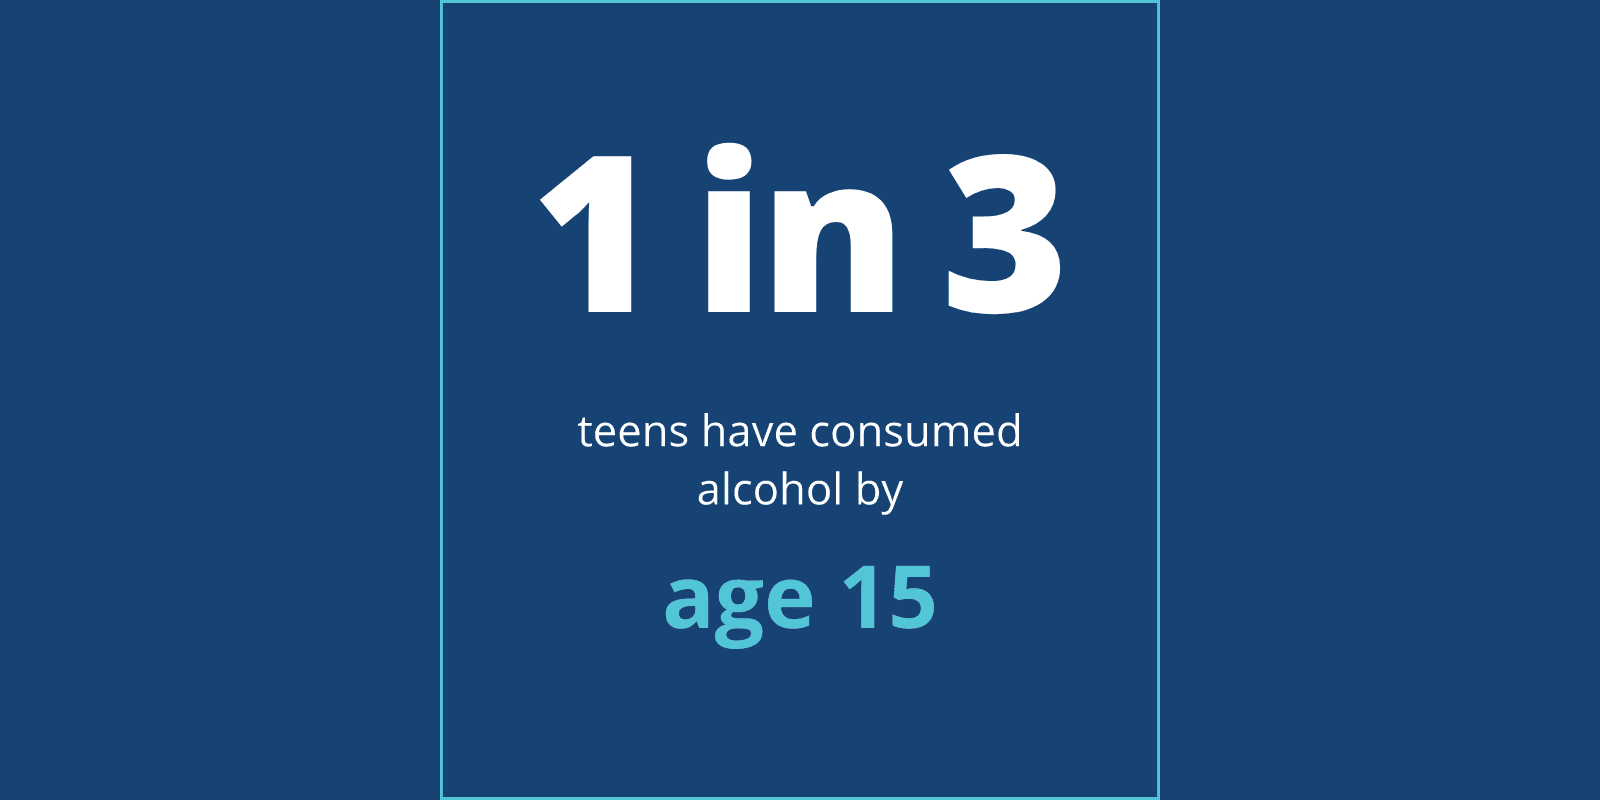 1 in 3 teens have consumed alcohol by age 15